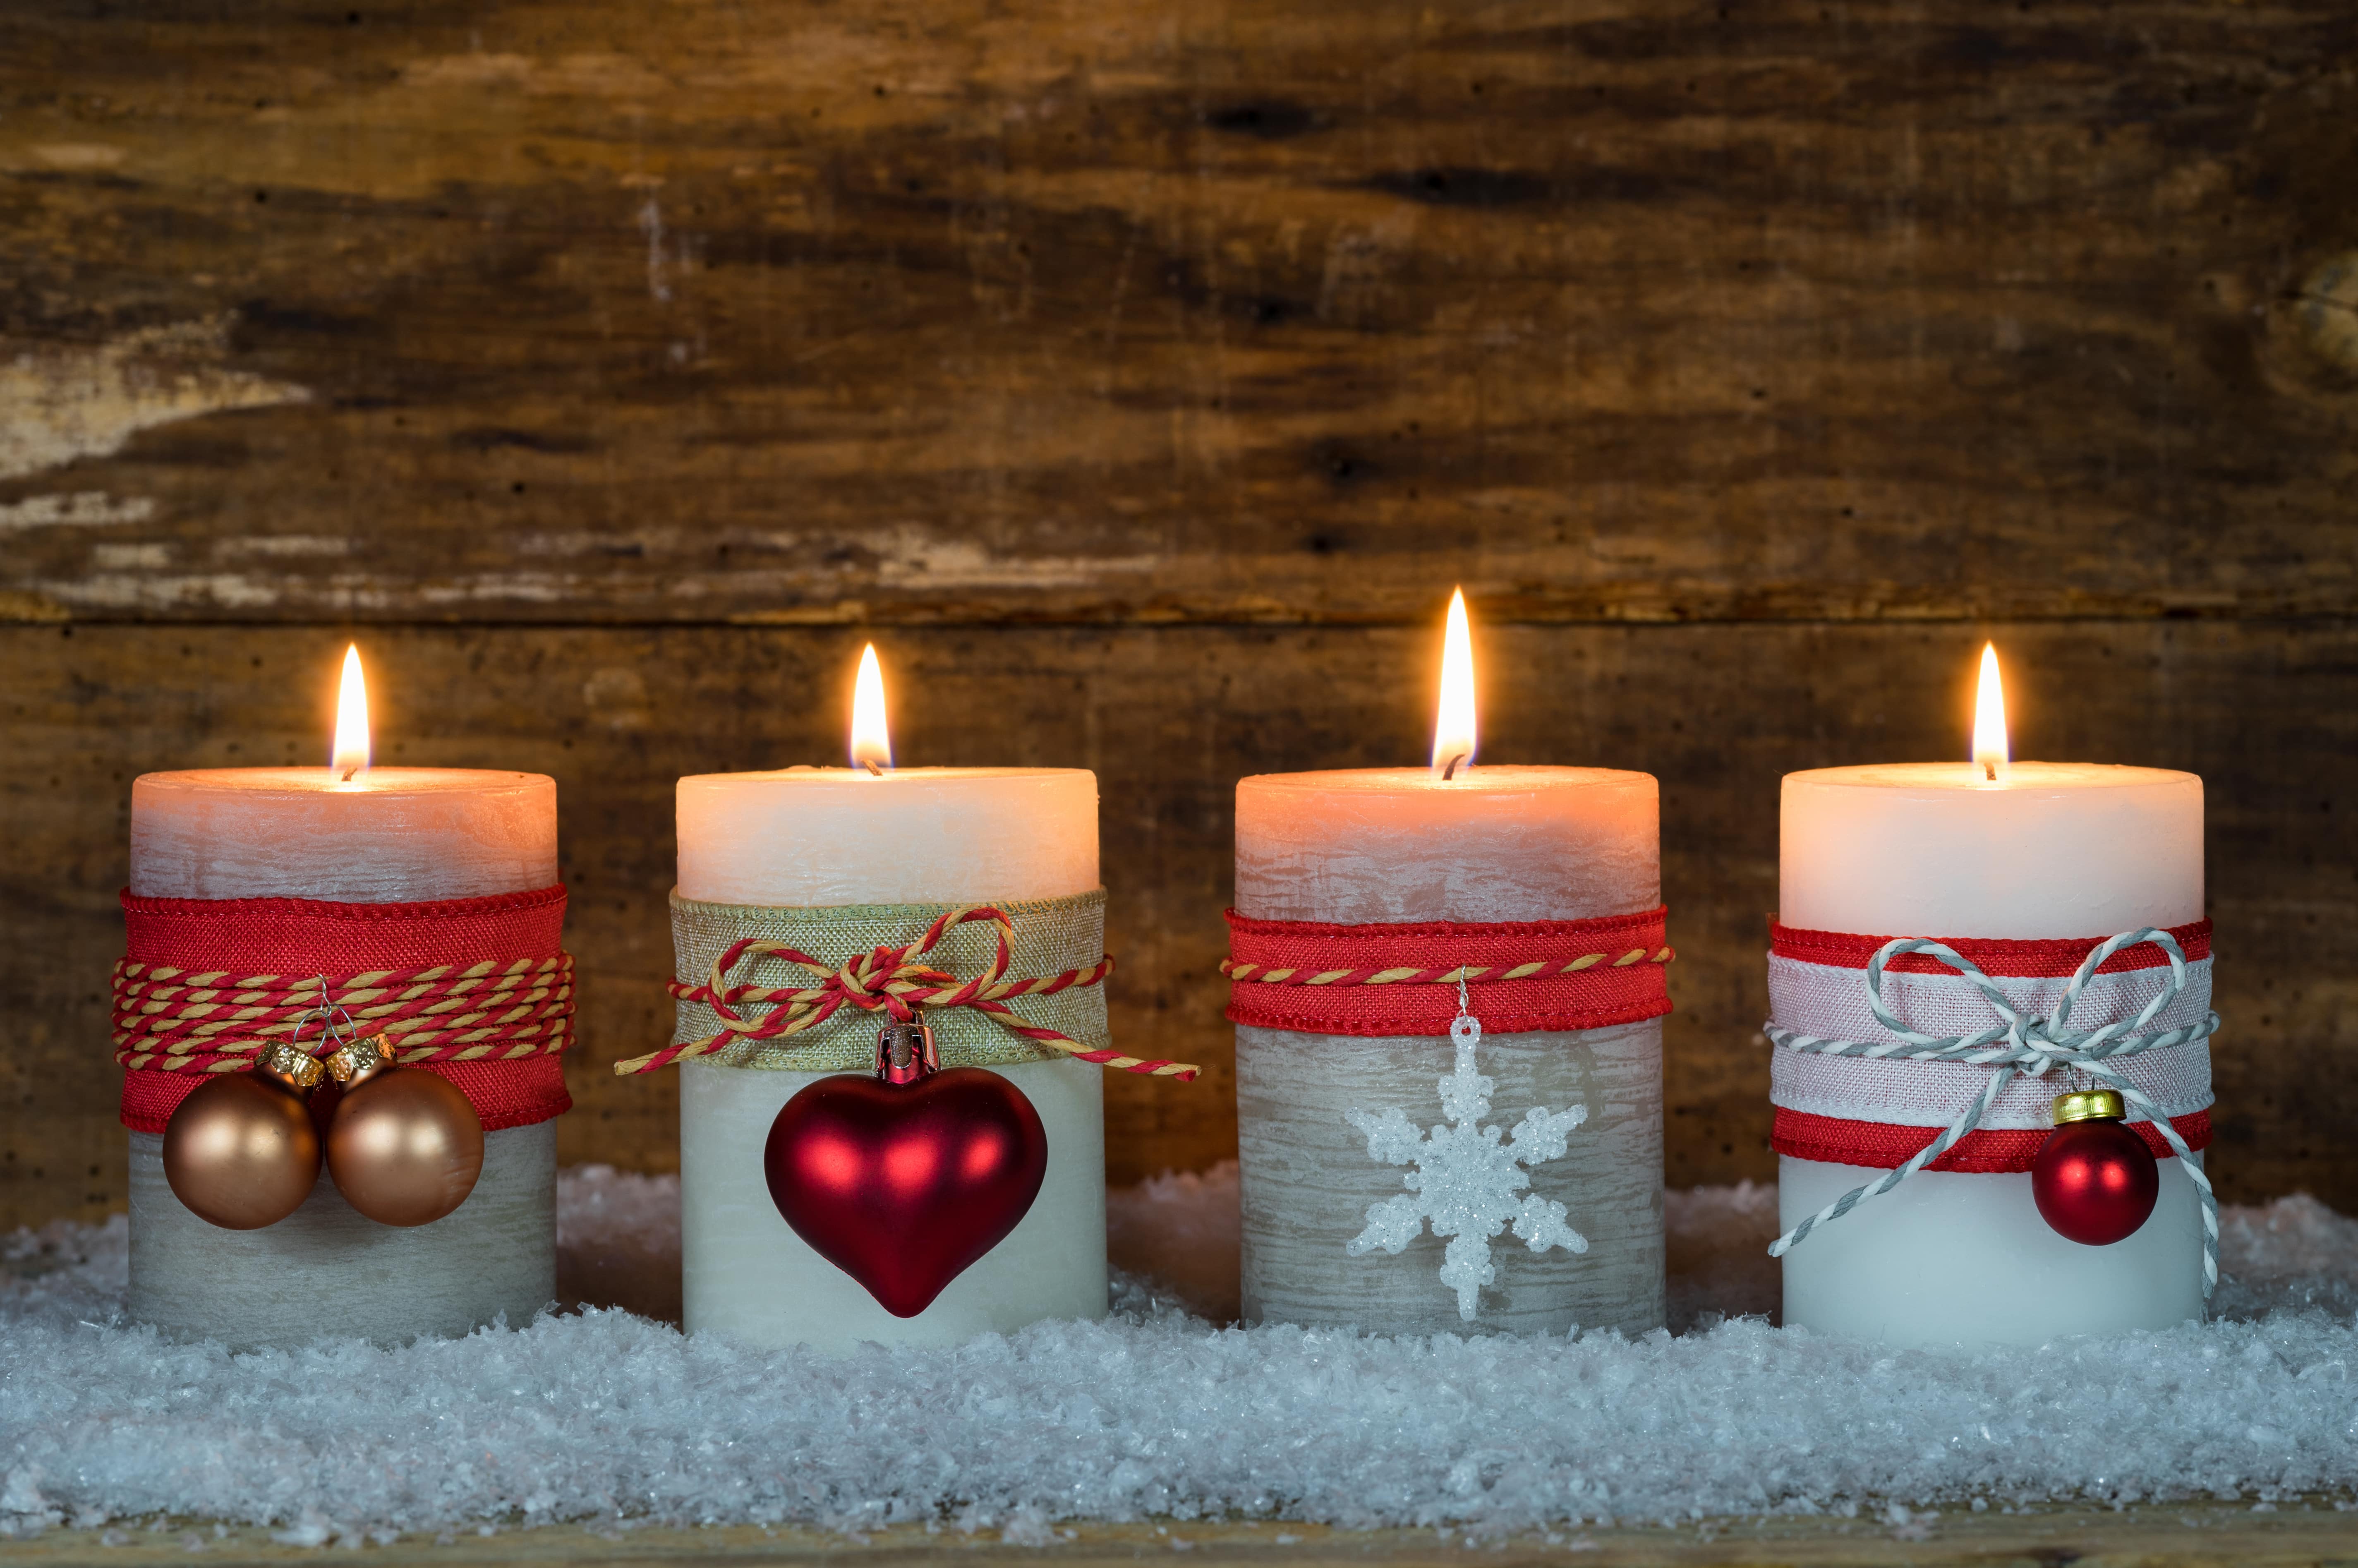 Four lit candles wrapped with ribbon and ornaments sitting on top of artificial snow in front of a wooden backdrop